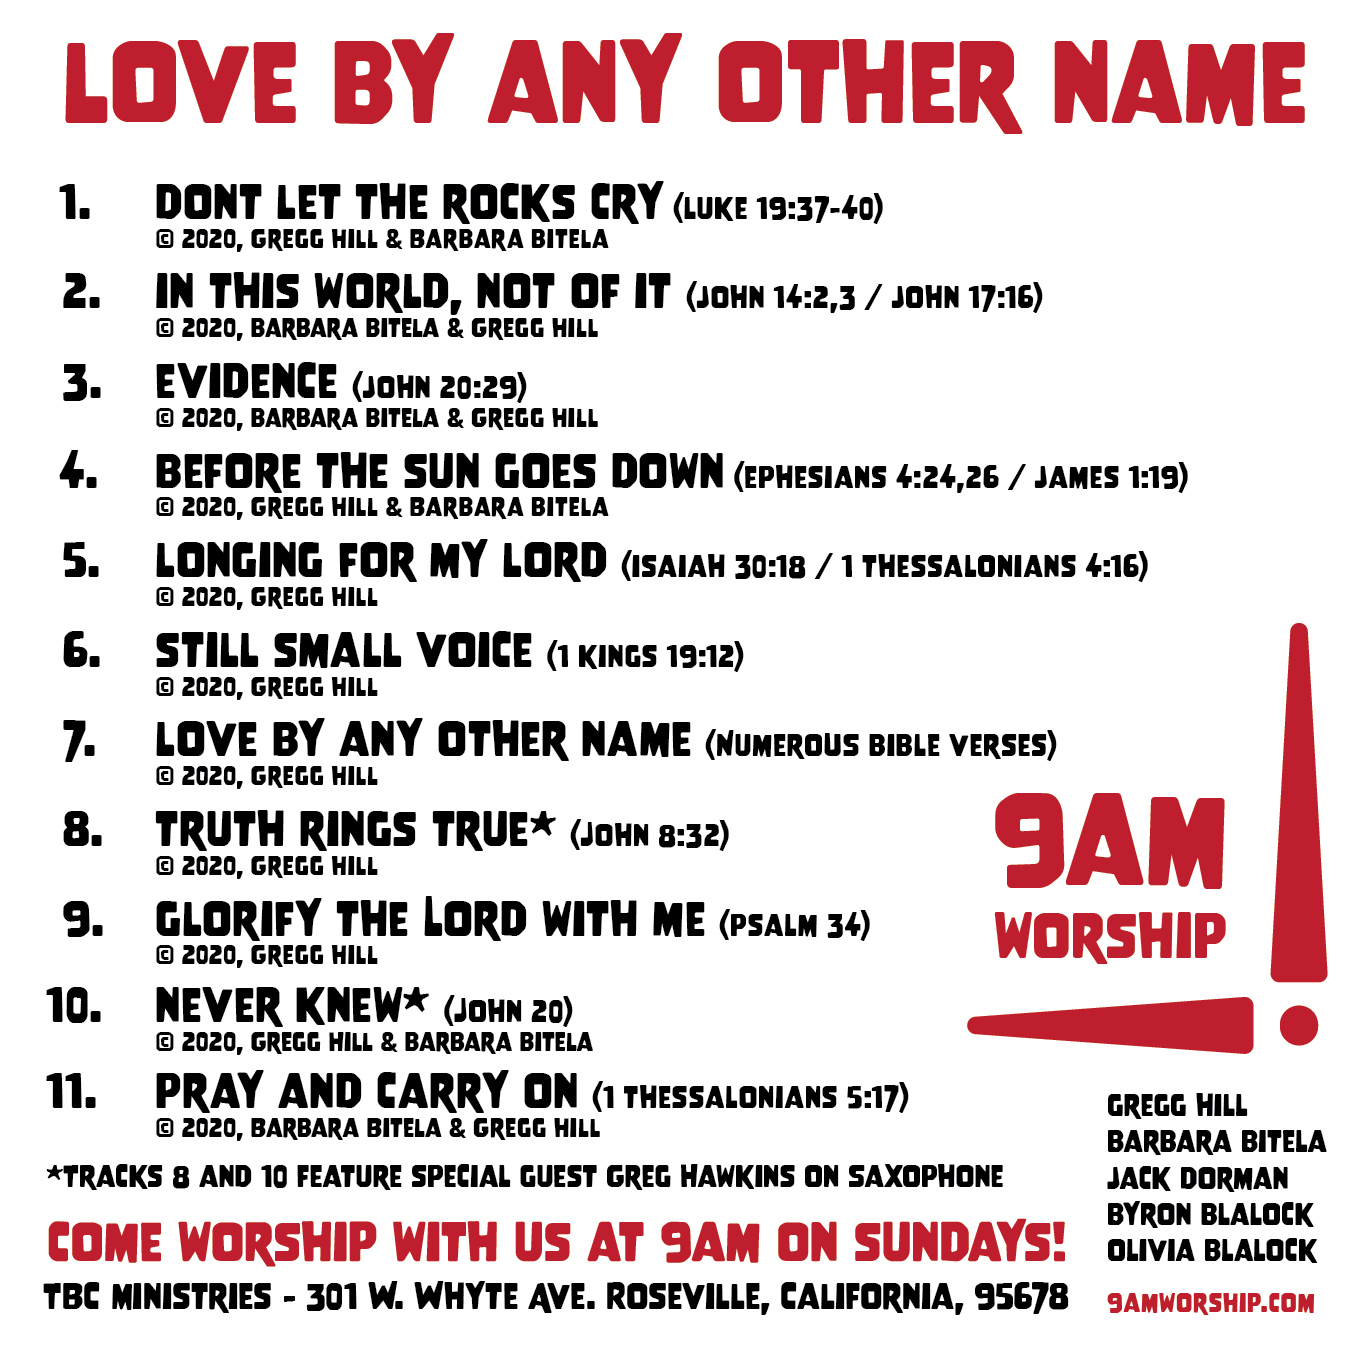 Album insert for "Love by any other name" by 9am worship